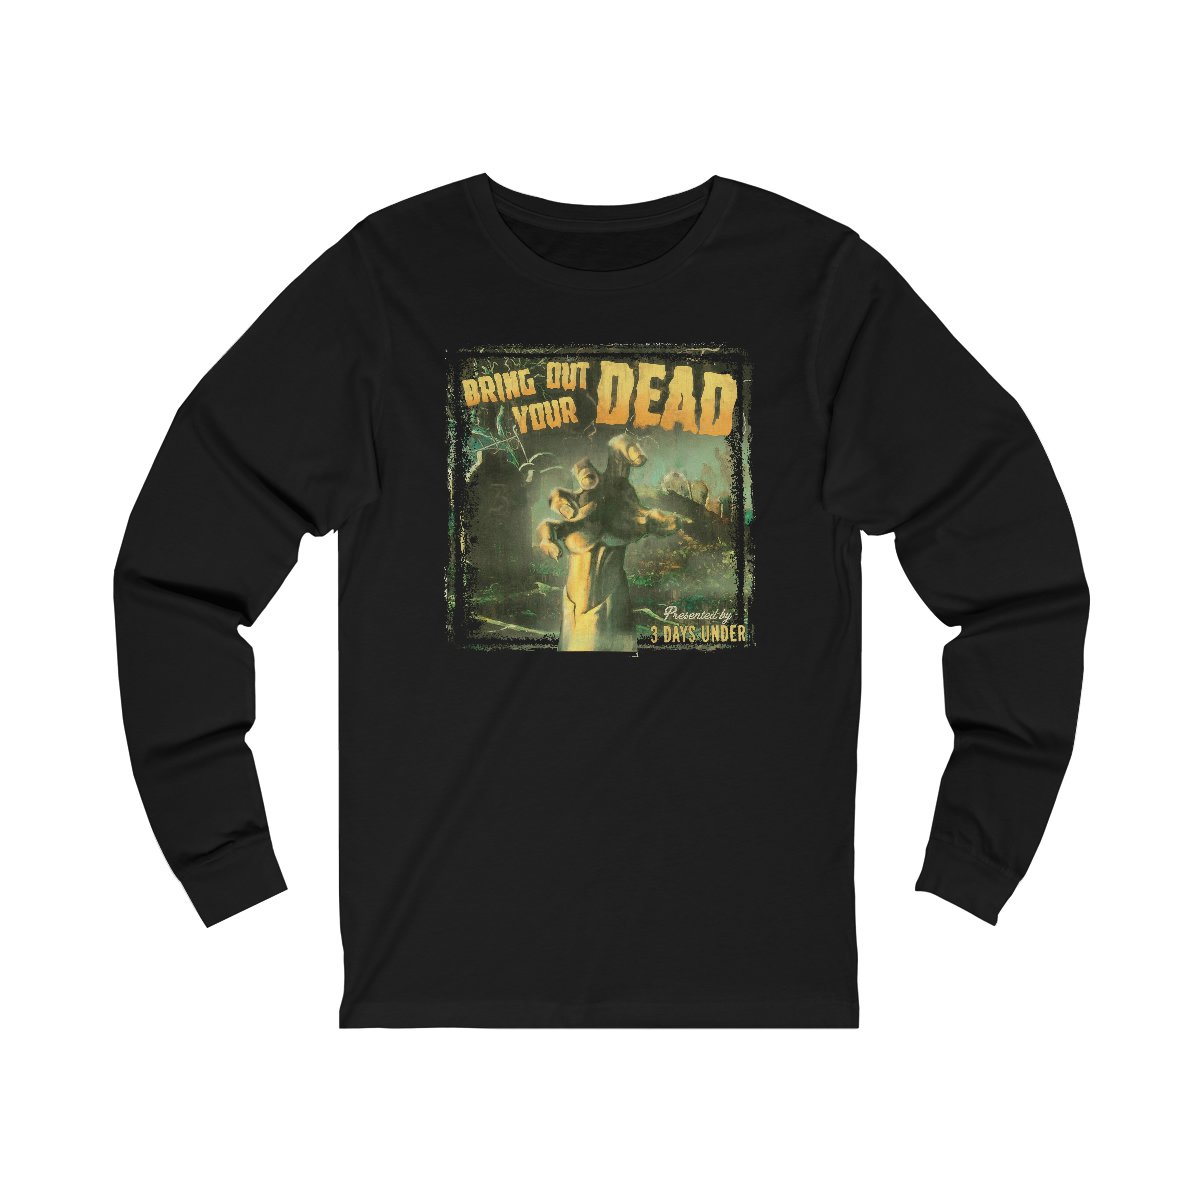 3 Days Under – Bring Out Your Dead Long Sleeve Tshirt